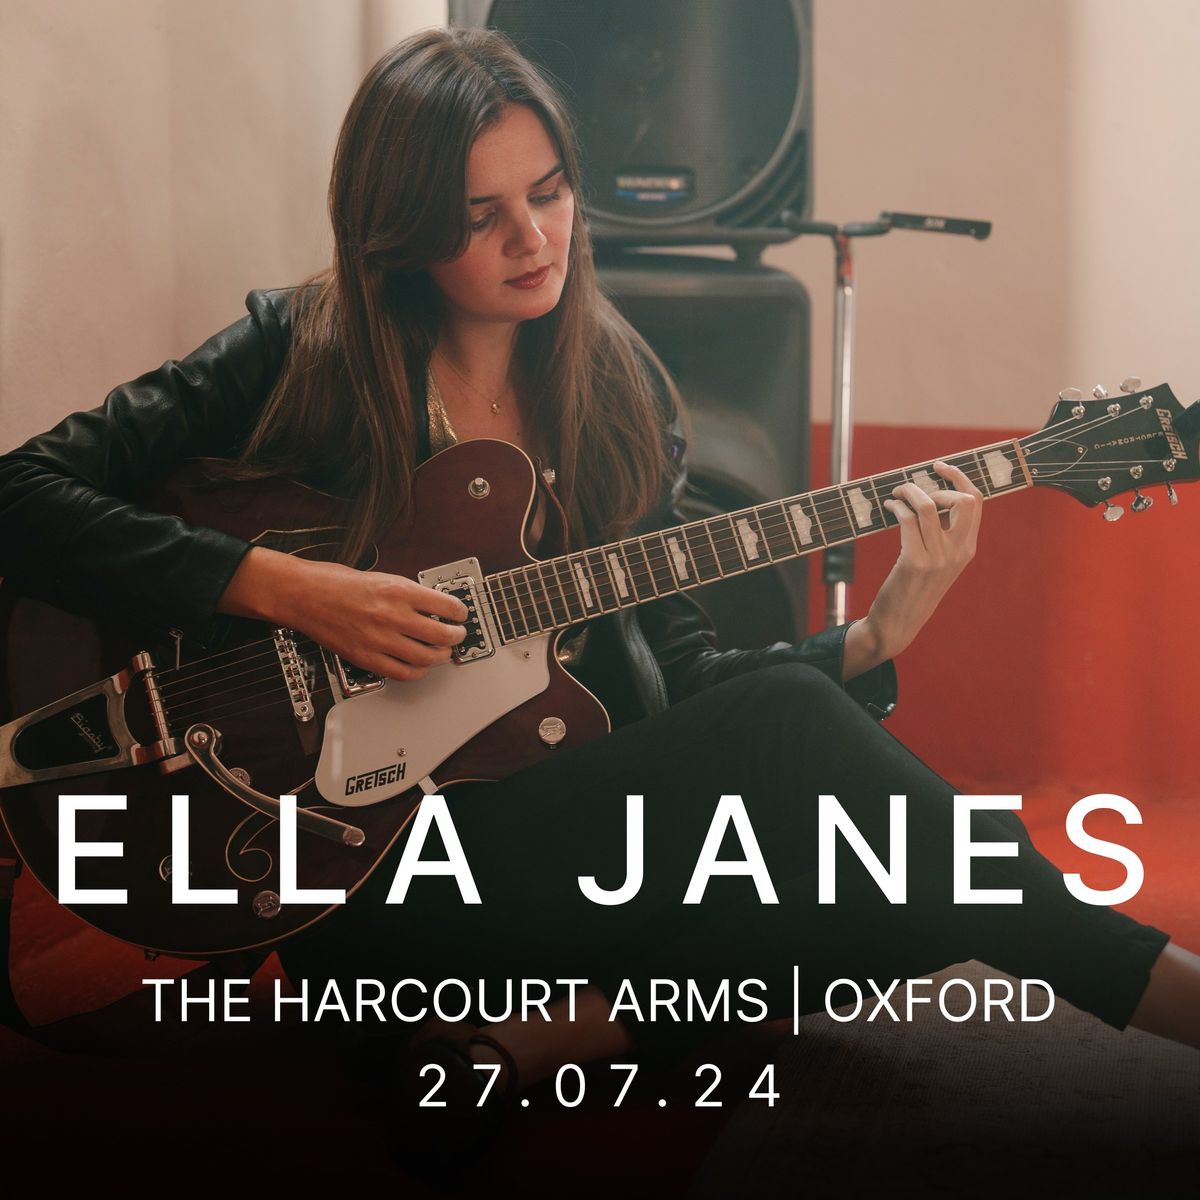 Ella Janes (full band) at The Harcourt Arms (Oxford)